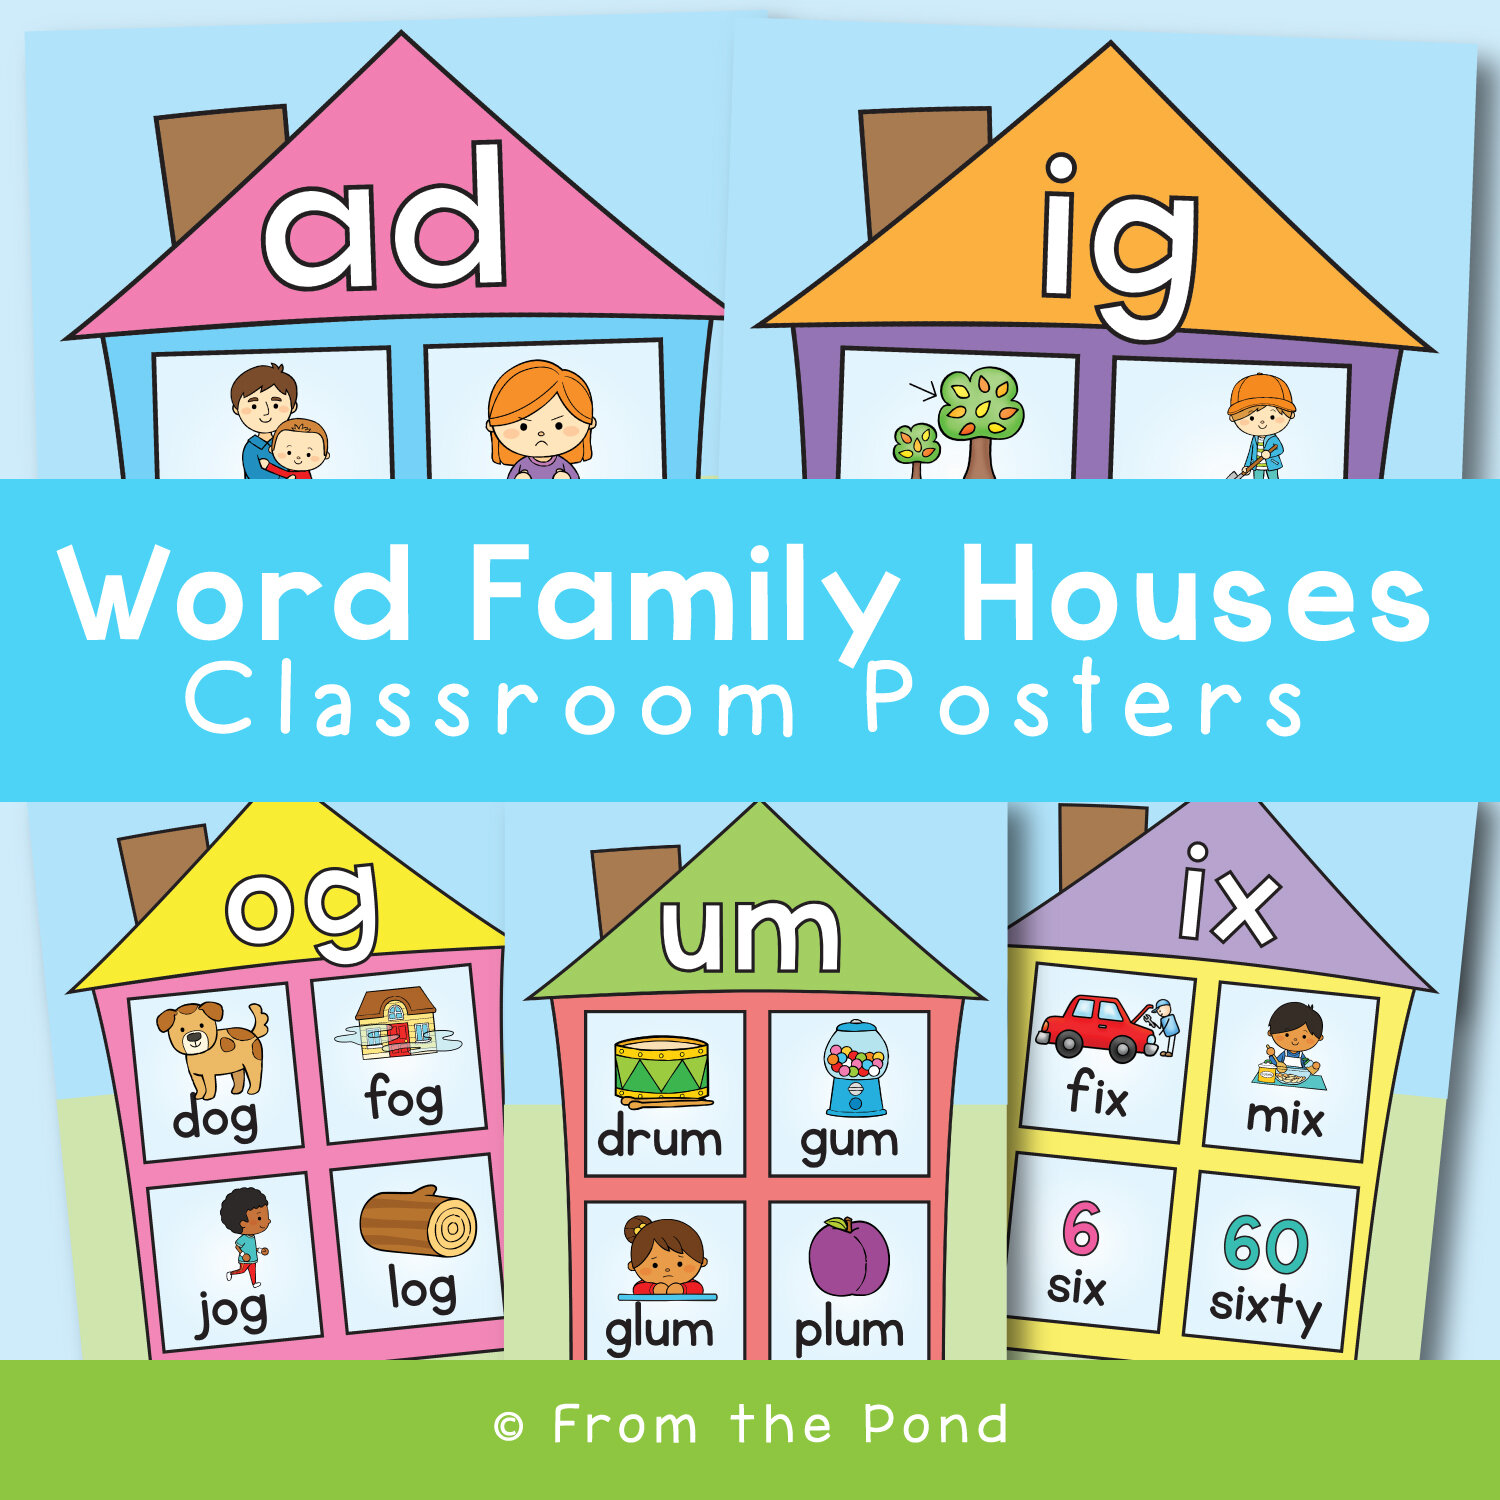 word-family-houses-posters-pic-01.jpg